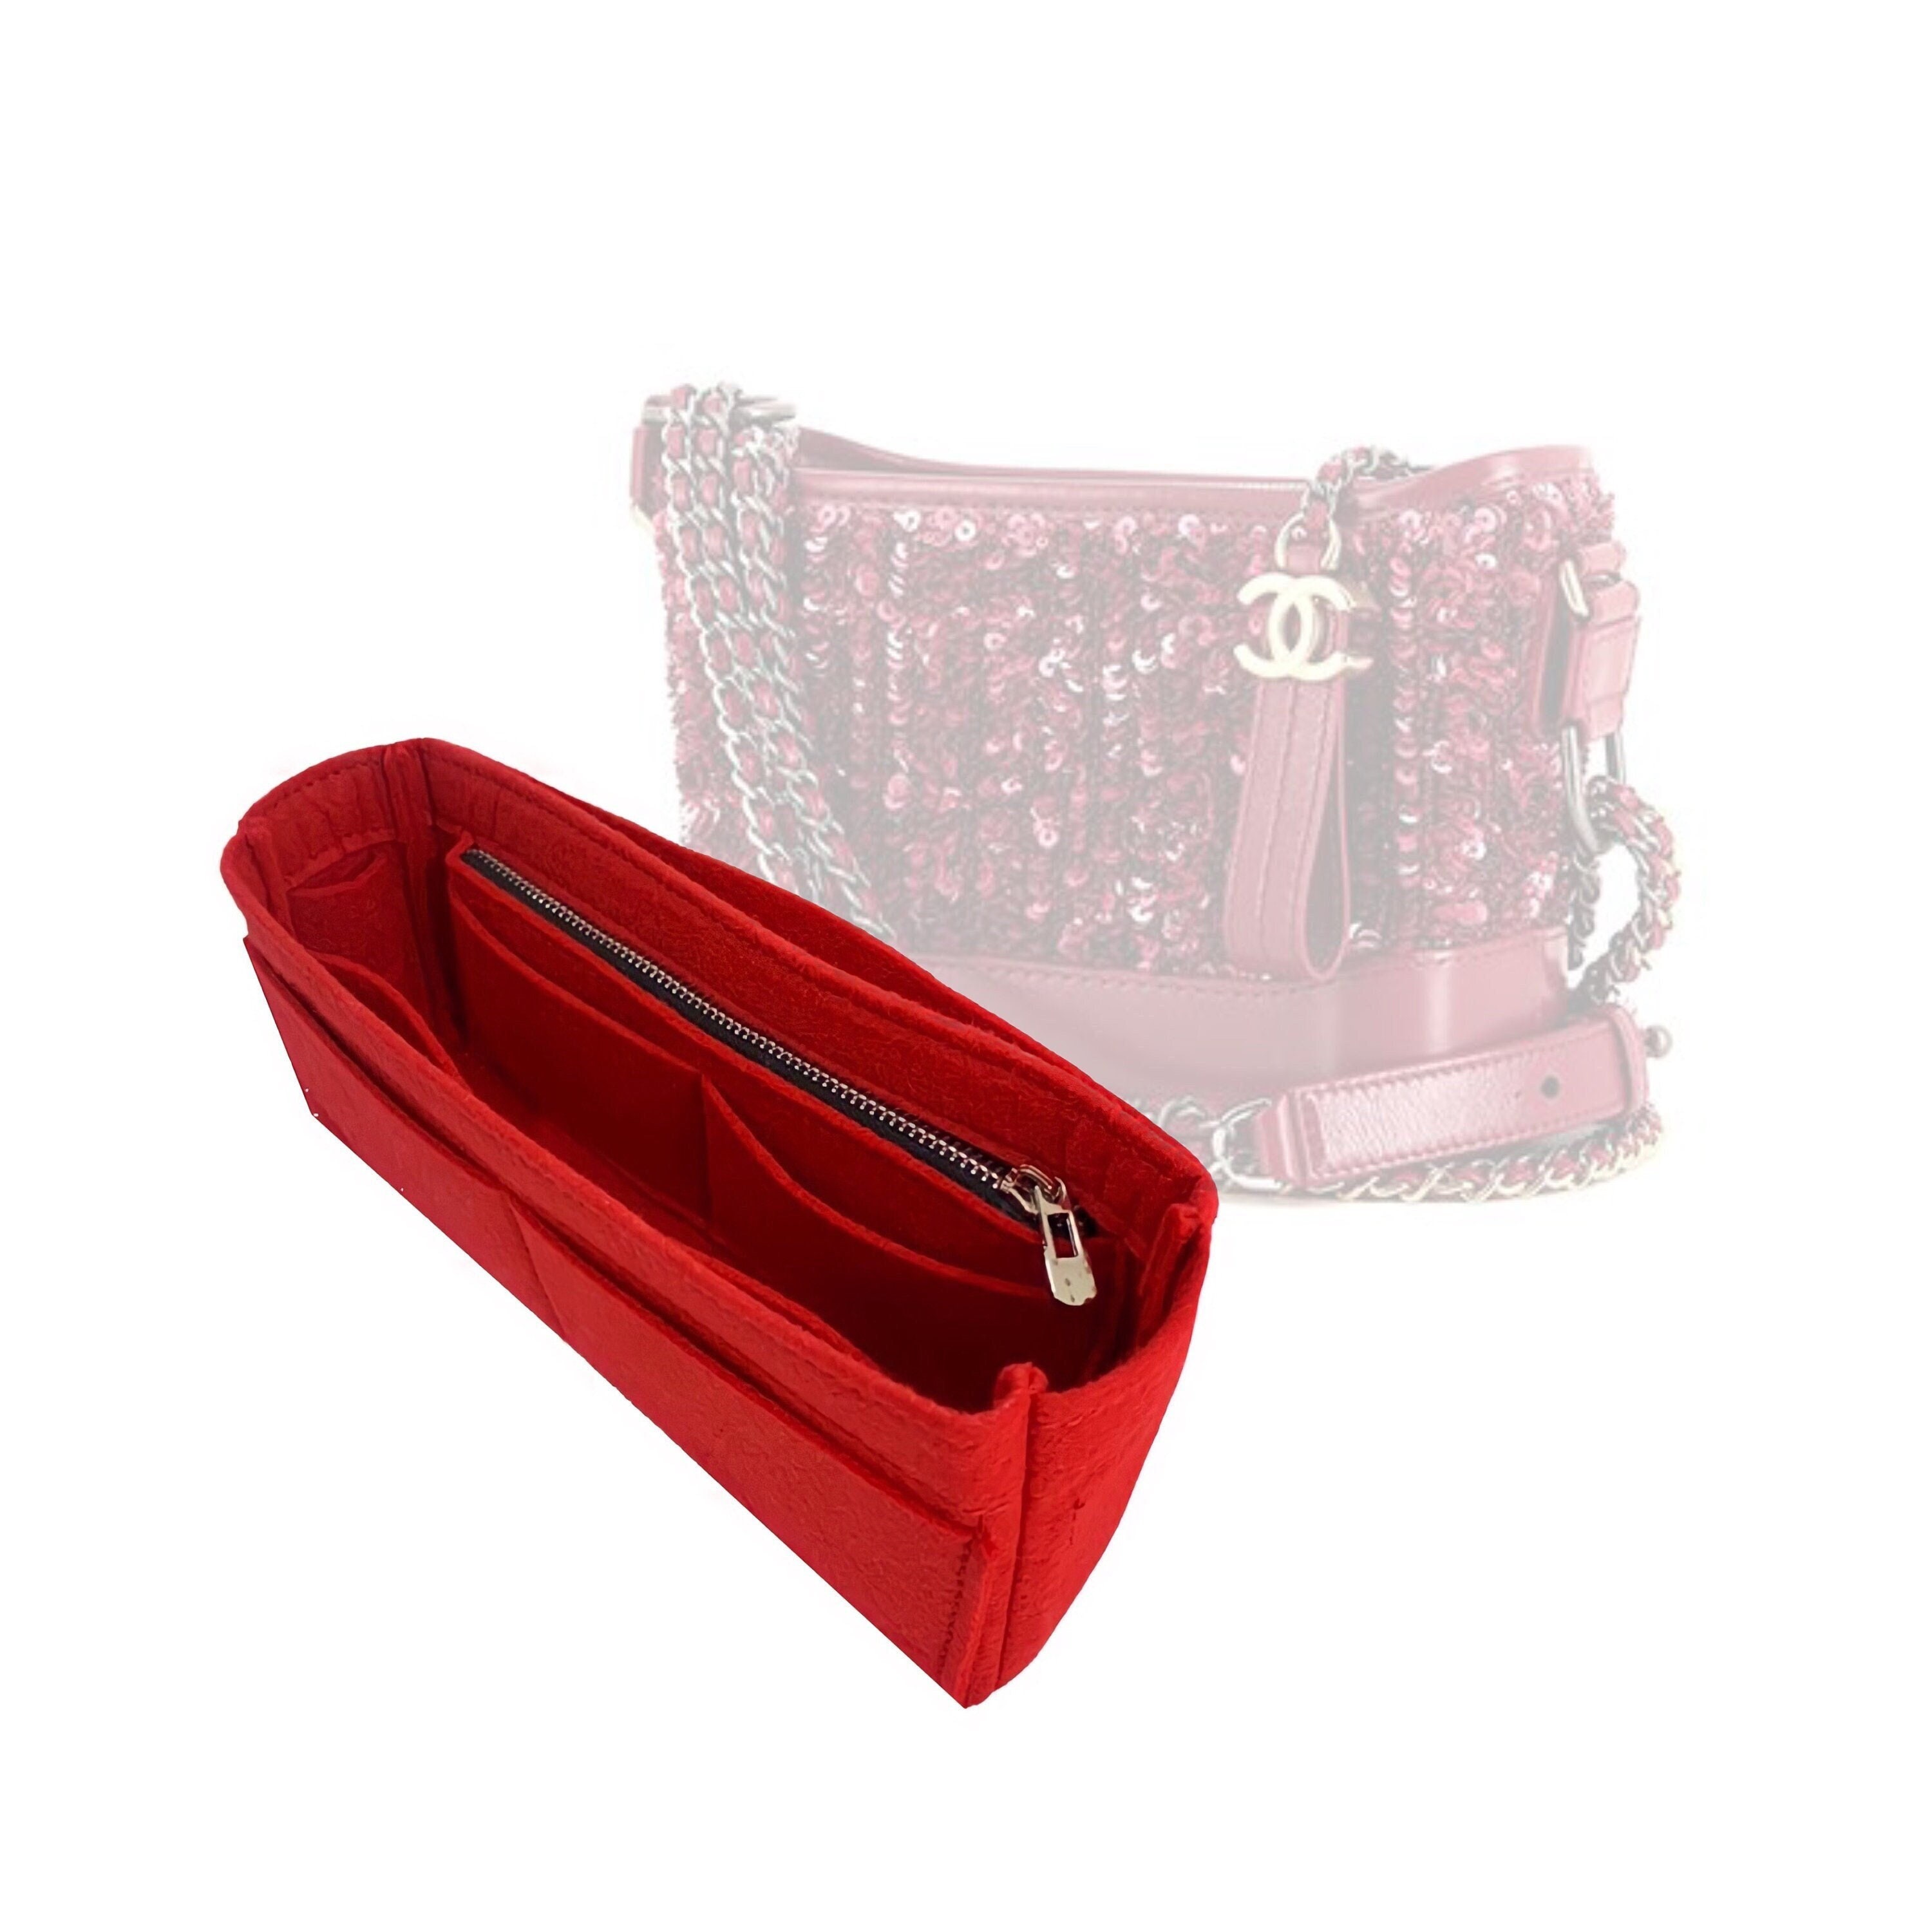 purse organizer insert for large chanel tote